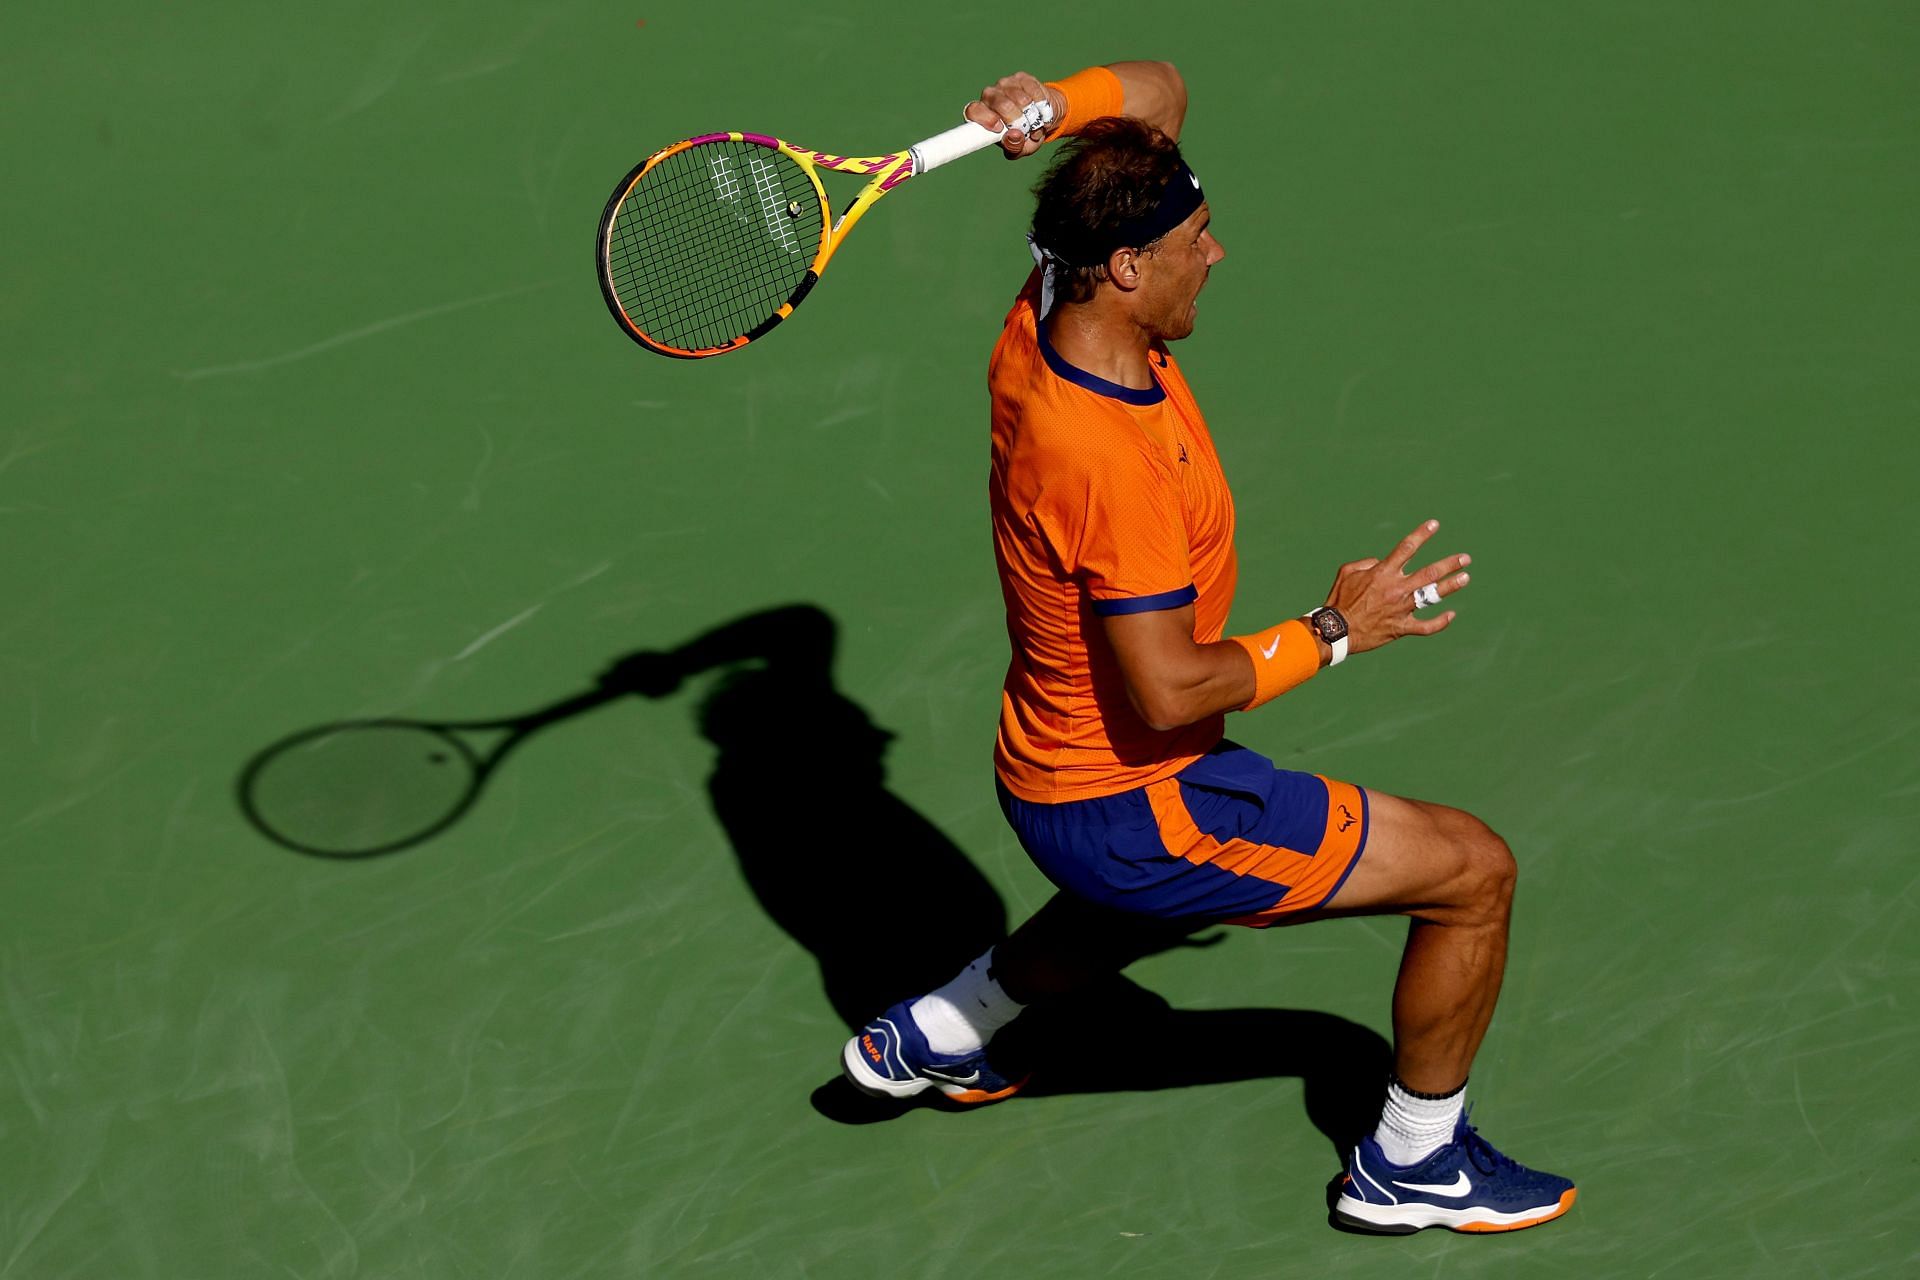 Rafael Nadal will not feature in the Miami Open this year